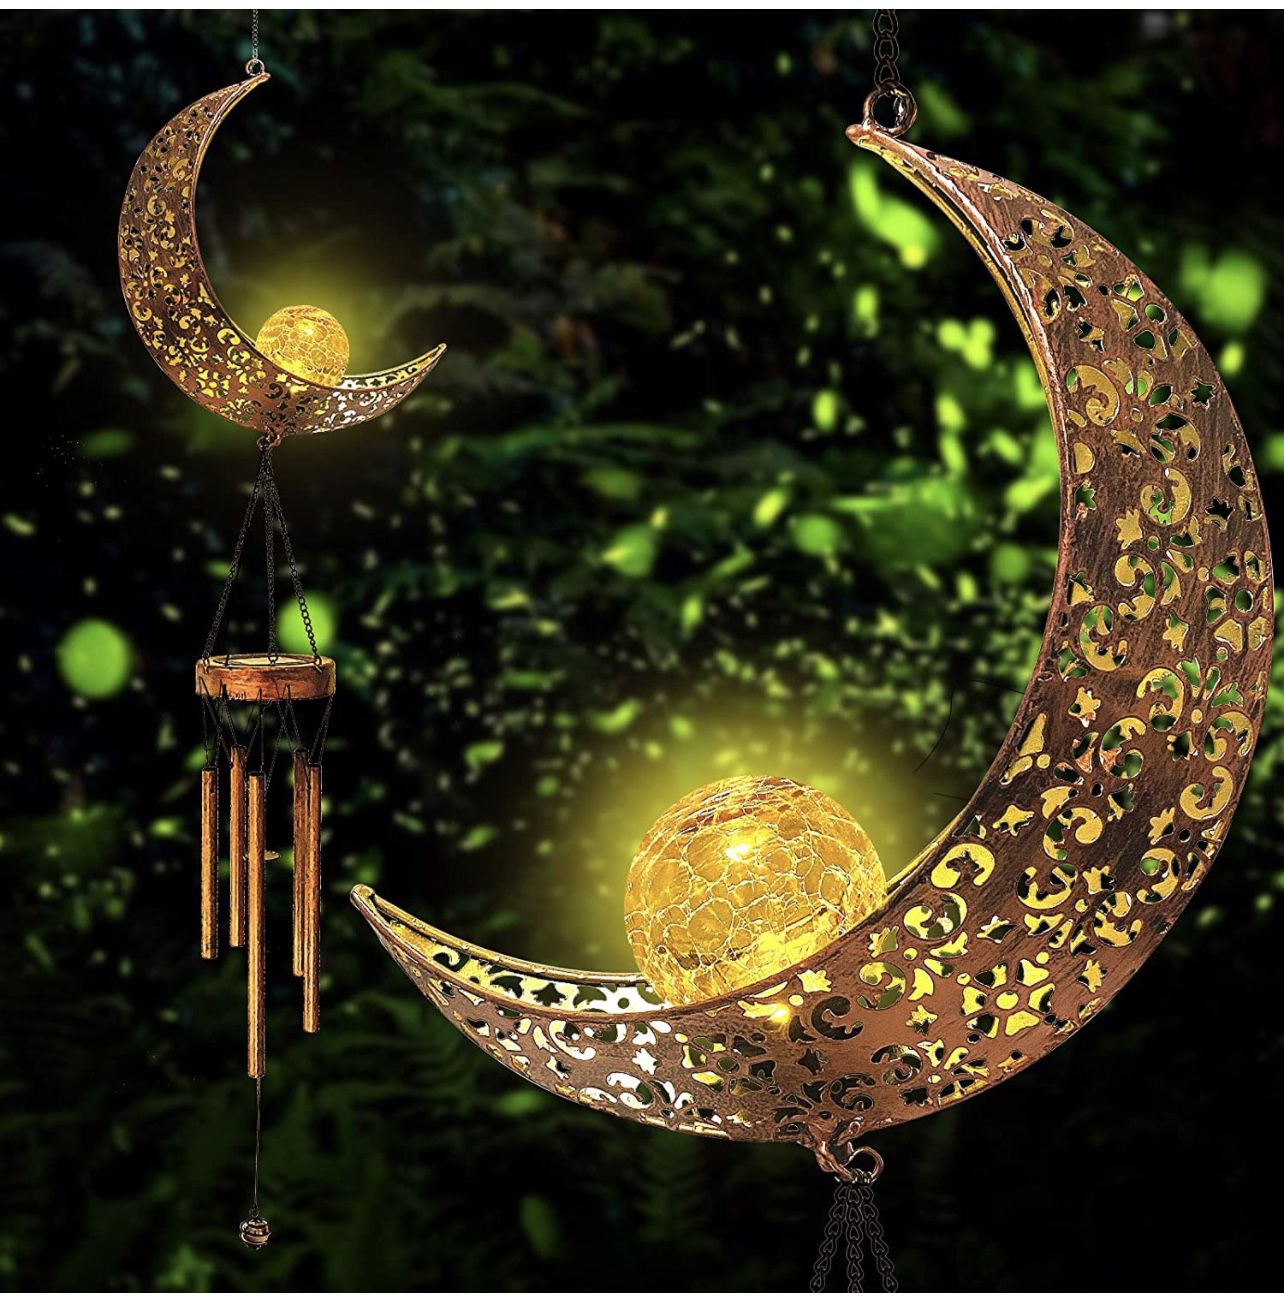 Solar Wind Chimes Outdoor Light - Hanging Moon Crackle Glass Ball Warm LED Waterproof Memorial Wind Chimes with Metal Tubes, Unique Sympathy Gift for 